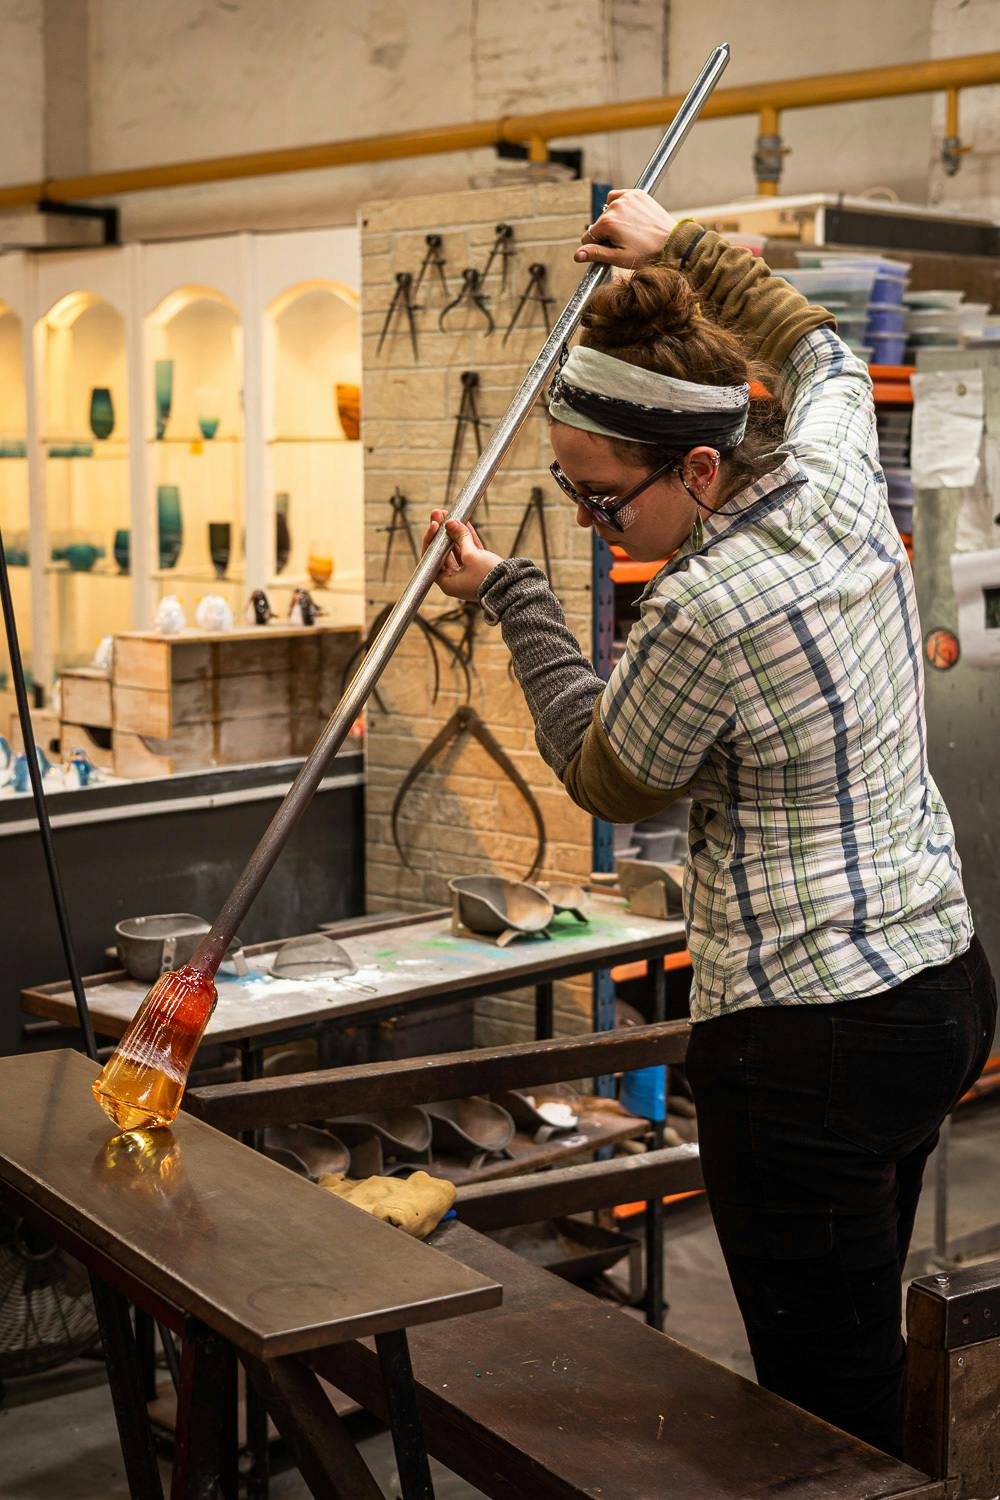 Image shows graduate student Charlotte Scurlock with her hair up in a ponytail, wearing protective goggles and a plaid shirt, manipulating glass in the Teign Valley Glass studio